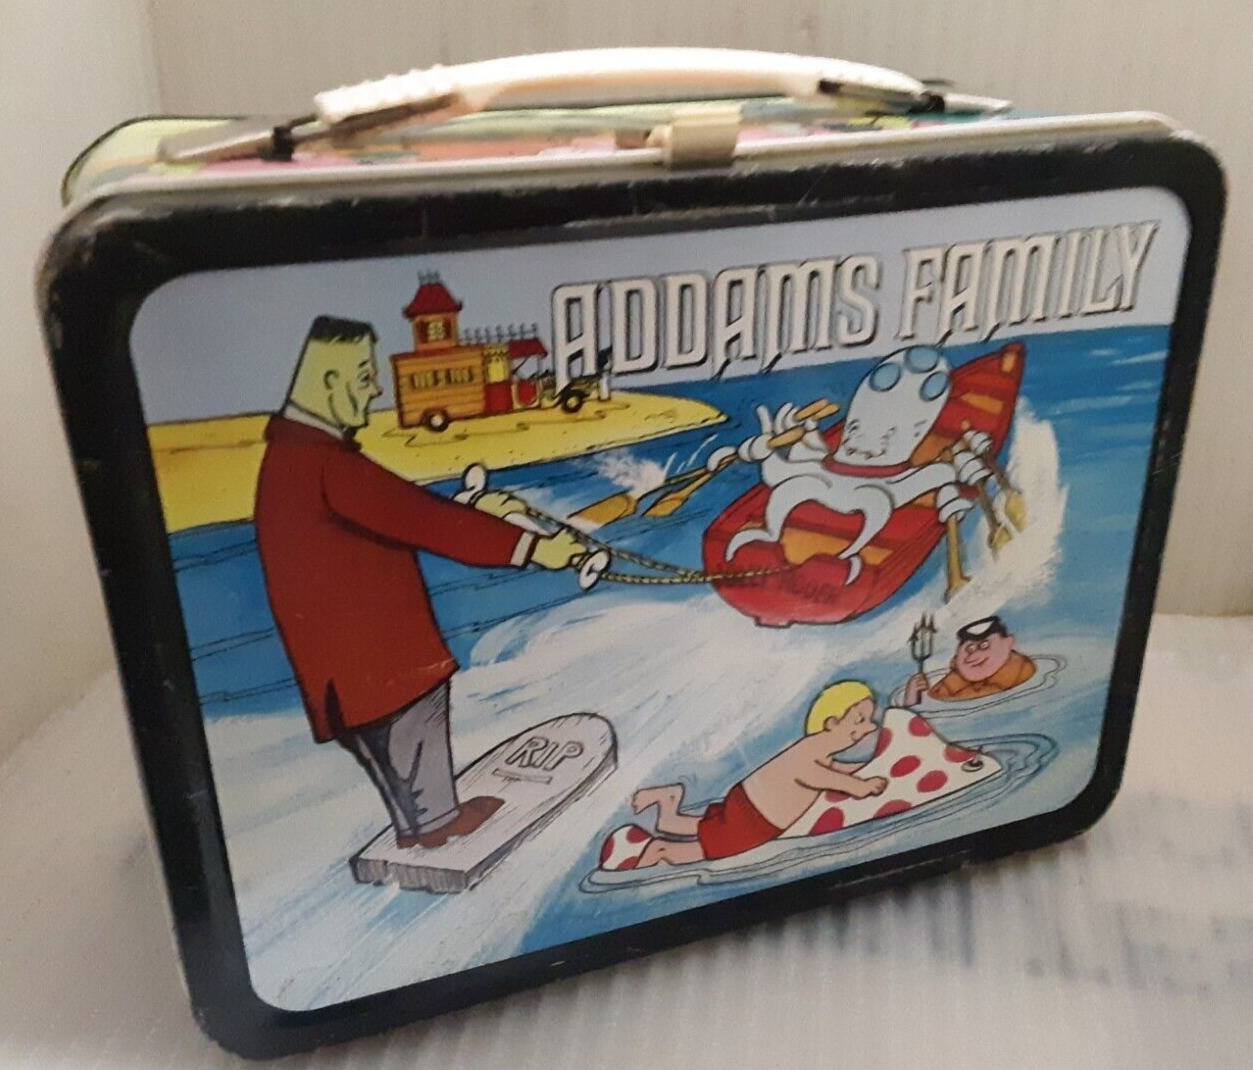 RARE 1974 Adams Family Metal Lunch Box By Thermos Brand ~ Nice Cartoon Lunchbox